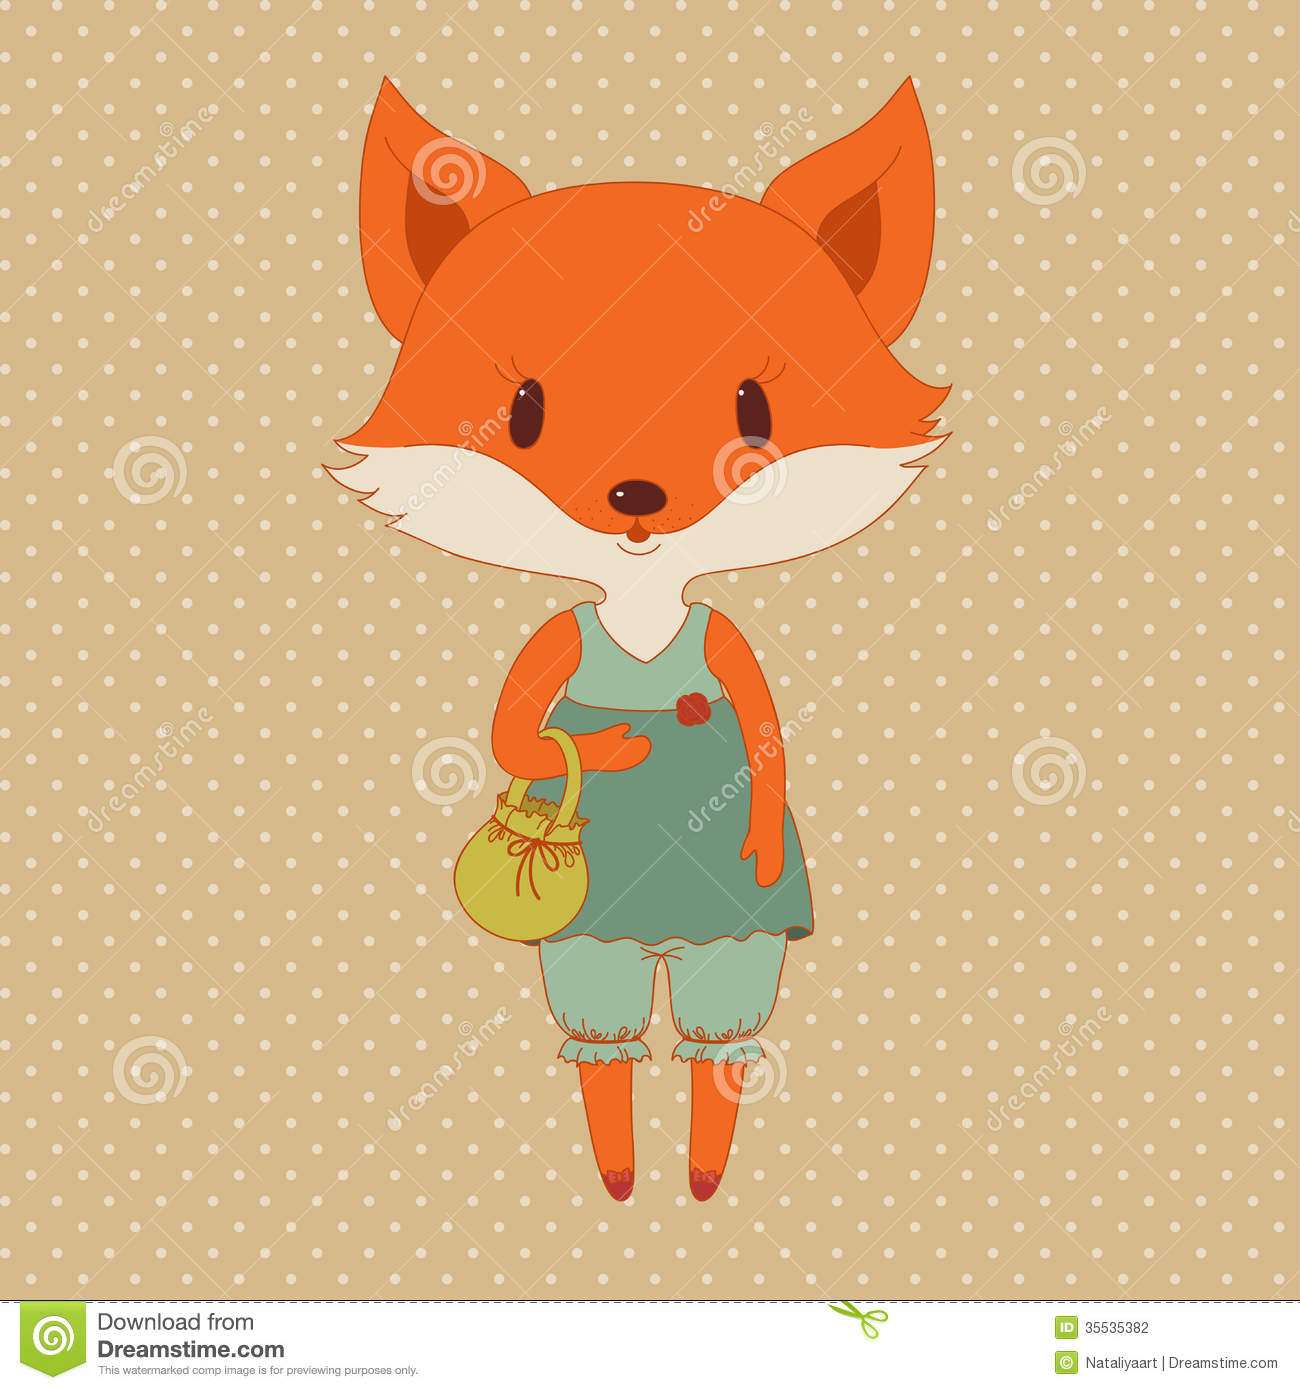 Illustration Of Cute Little Girl Fox In A Dress With A Handbag